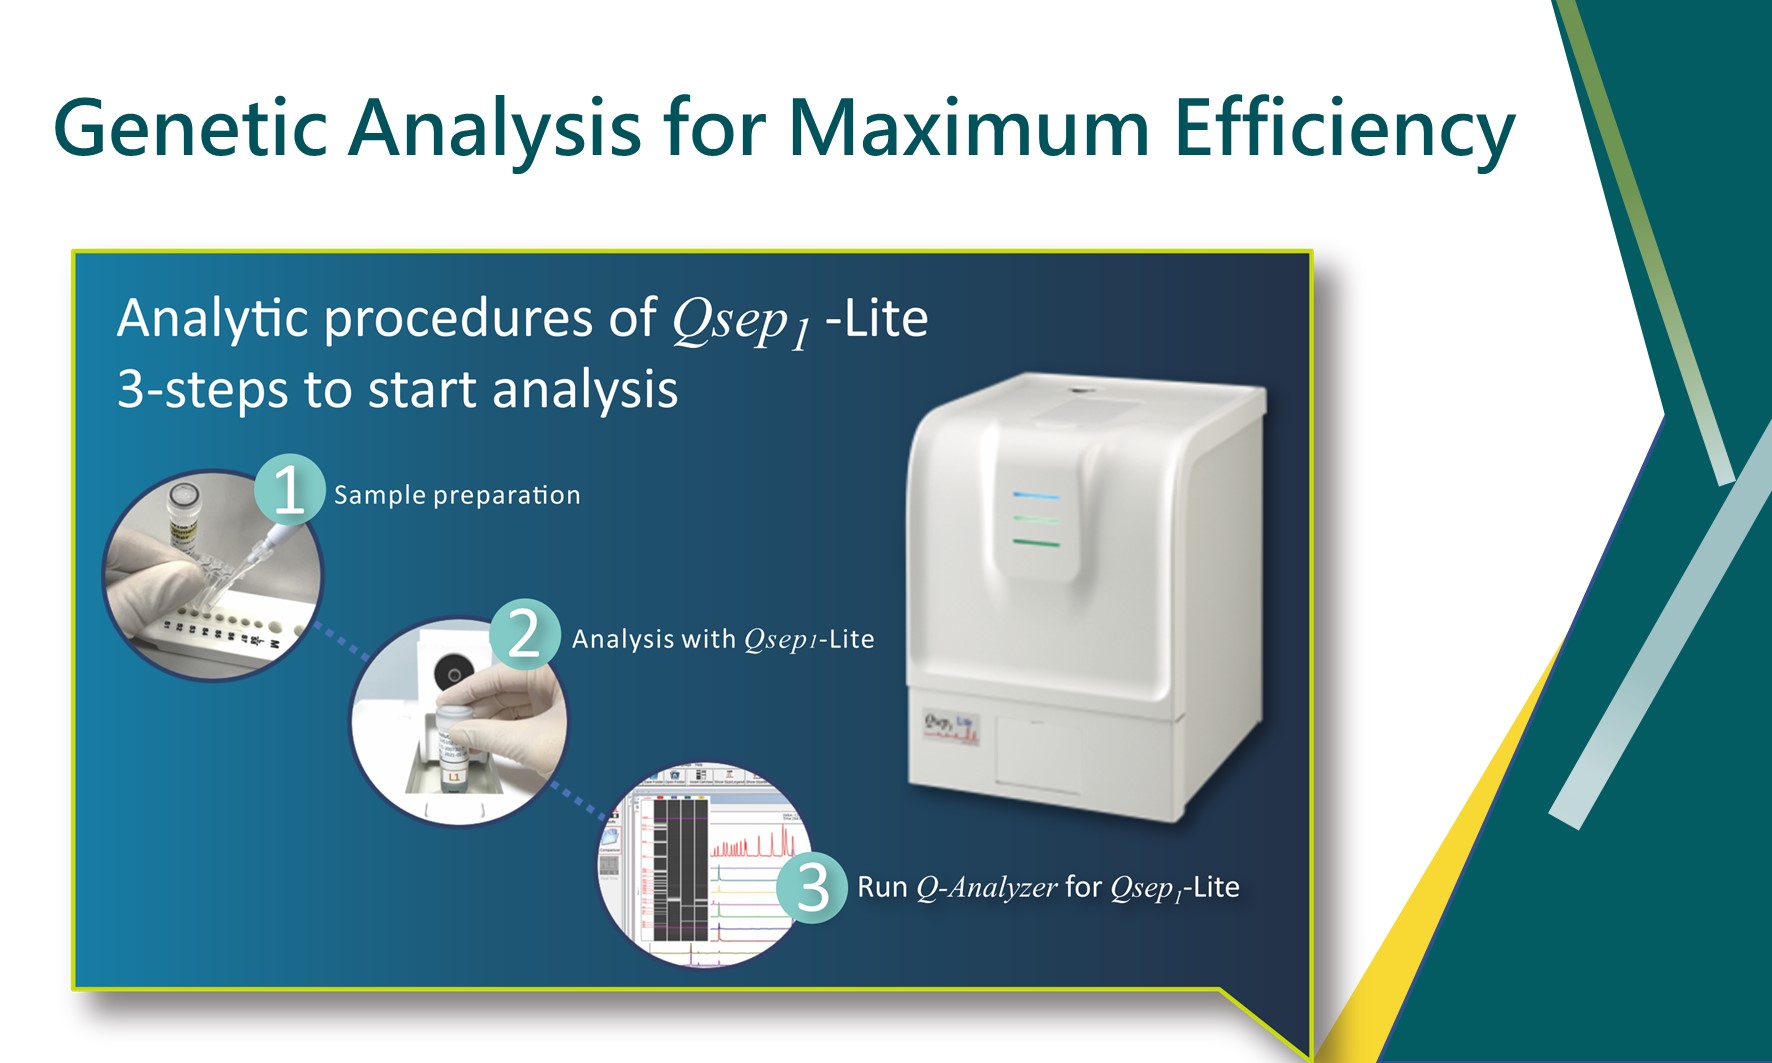 [Special Promotion by BiOptic USA] Genetic Analysis for Maximum Efficiency